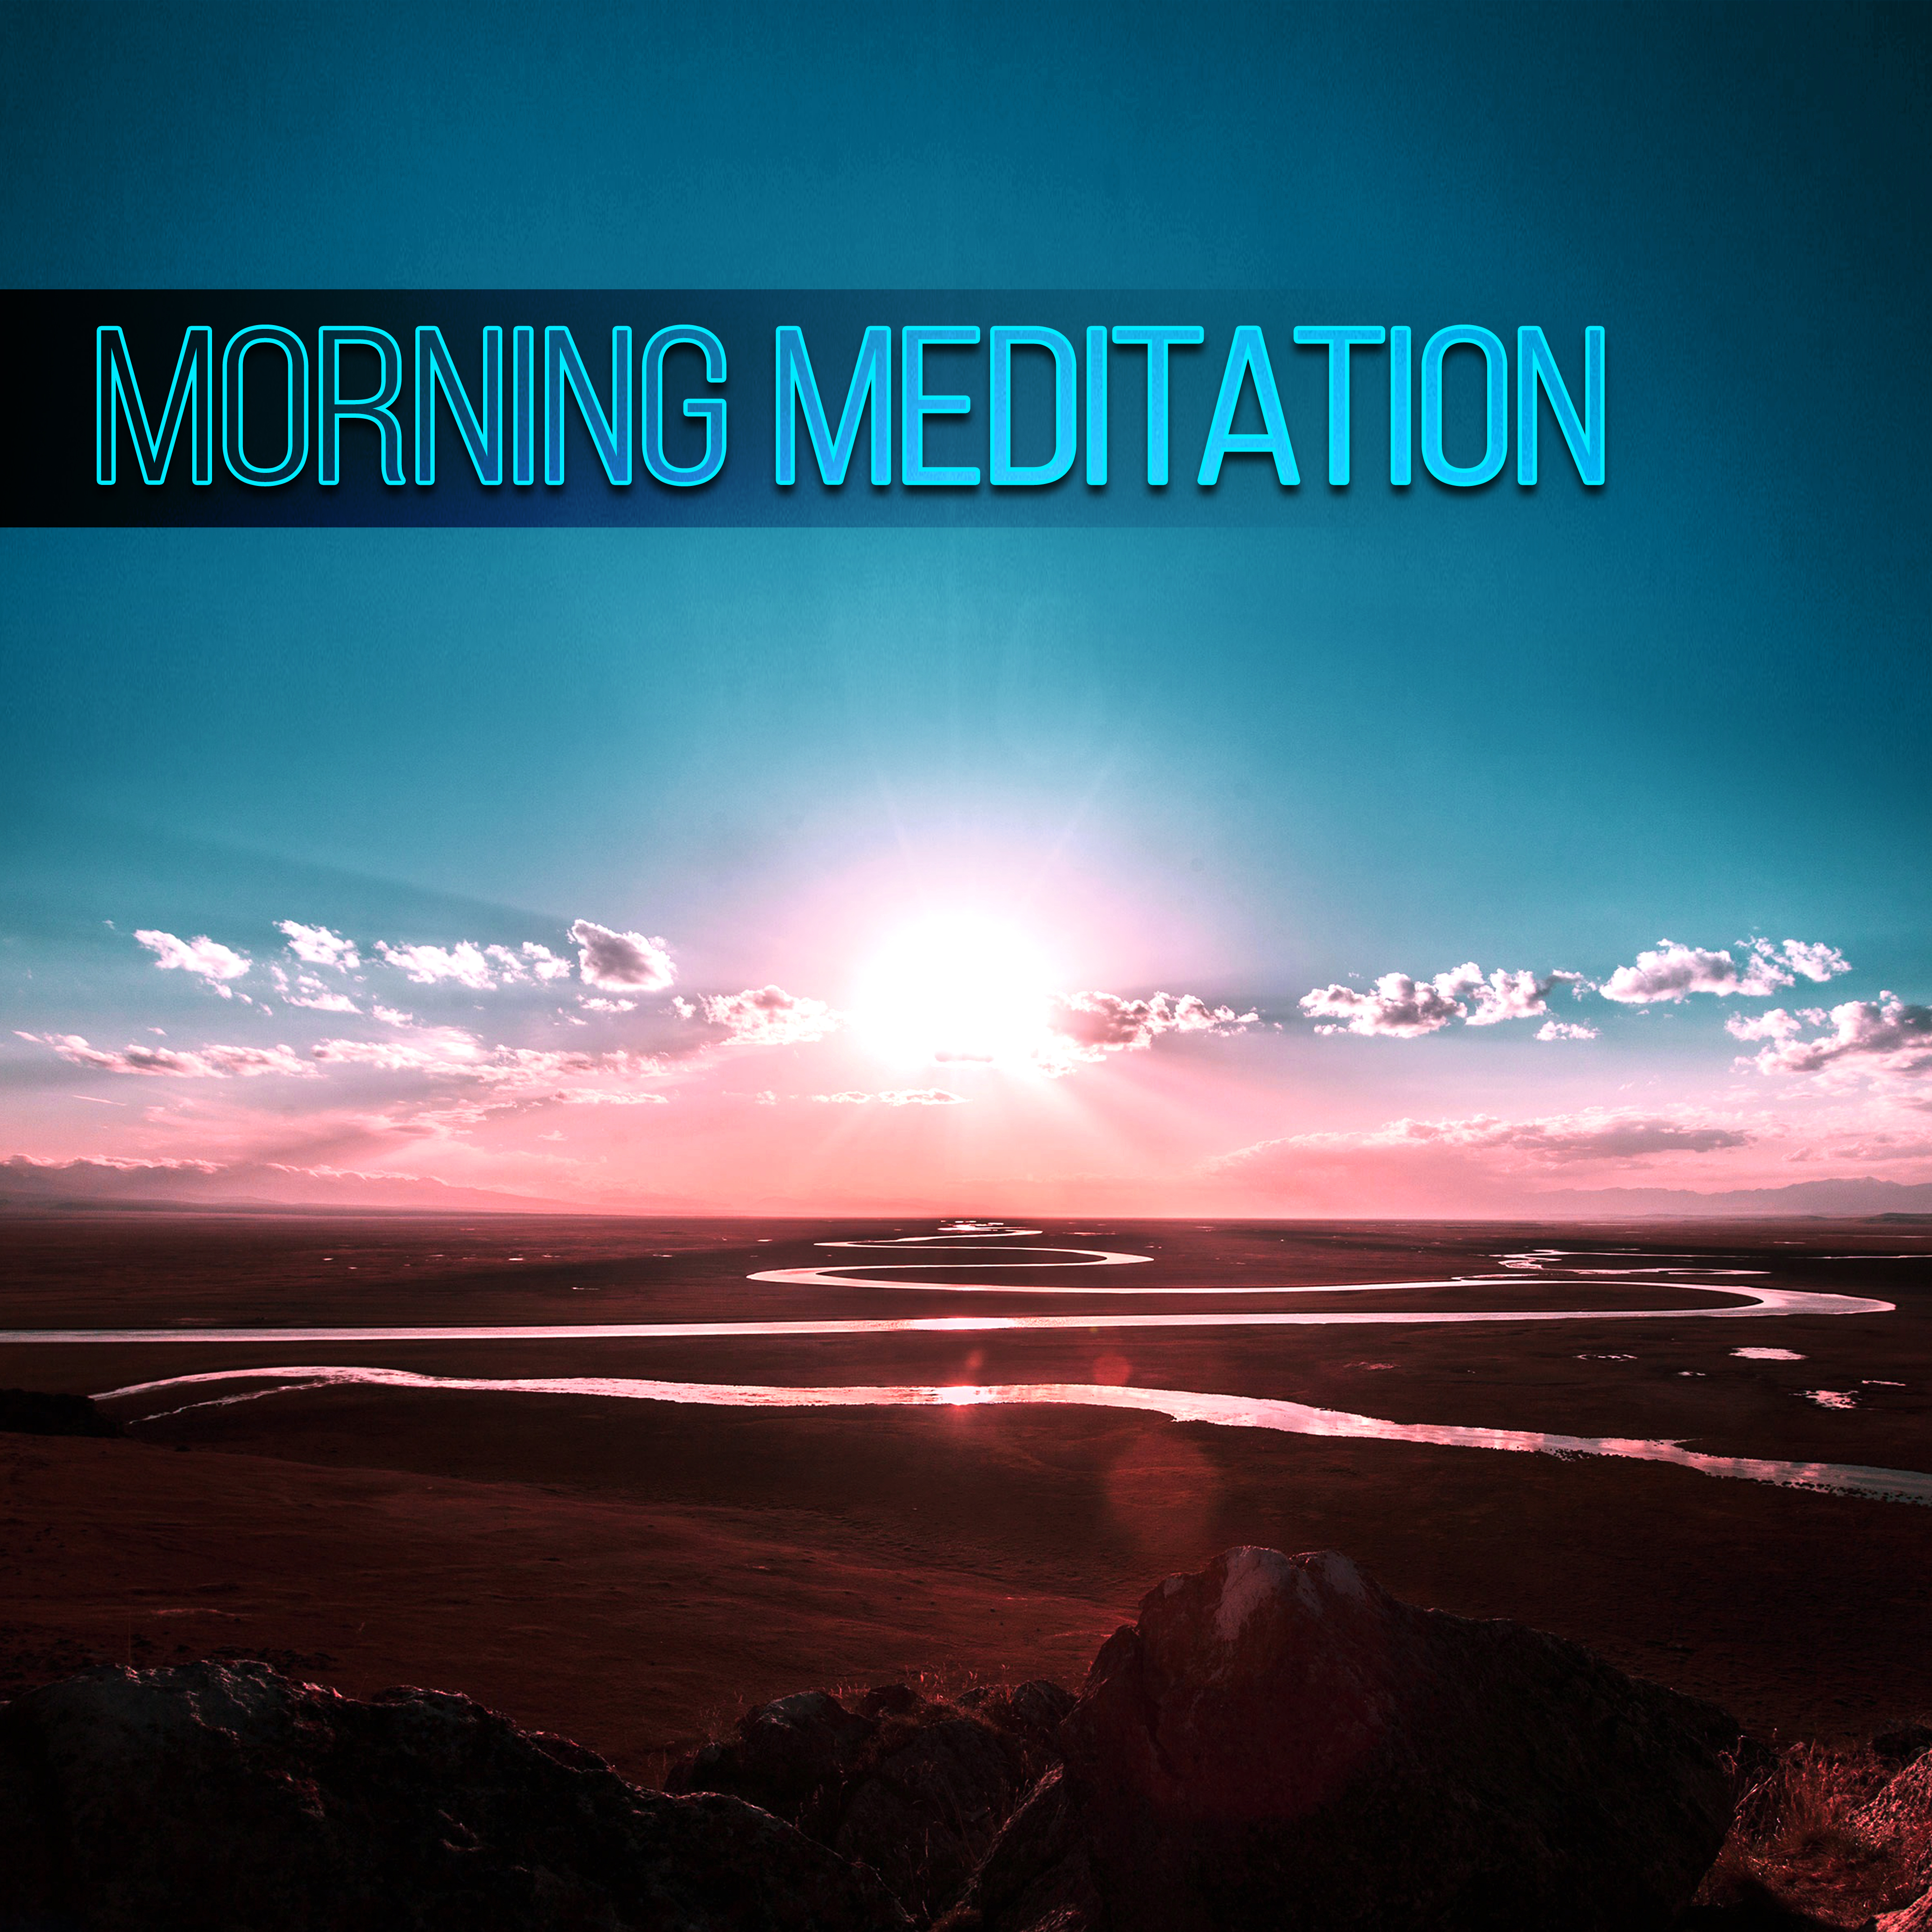 Morning Meditation - Hindu Yoga, Mindfulness Meditation & Relaxation with Flute Music and Nature Sounds, Inspiring Piano Music